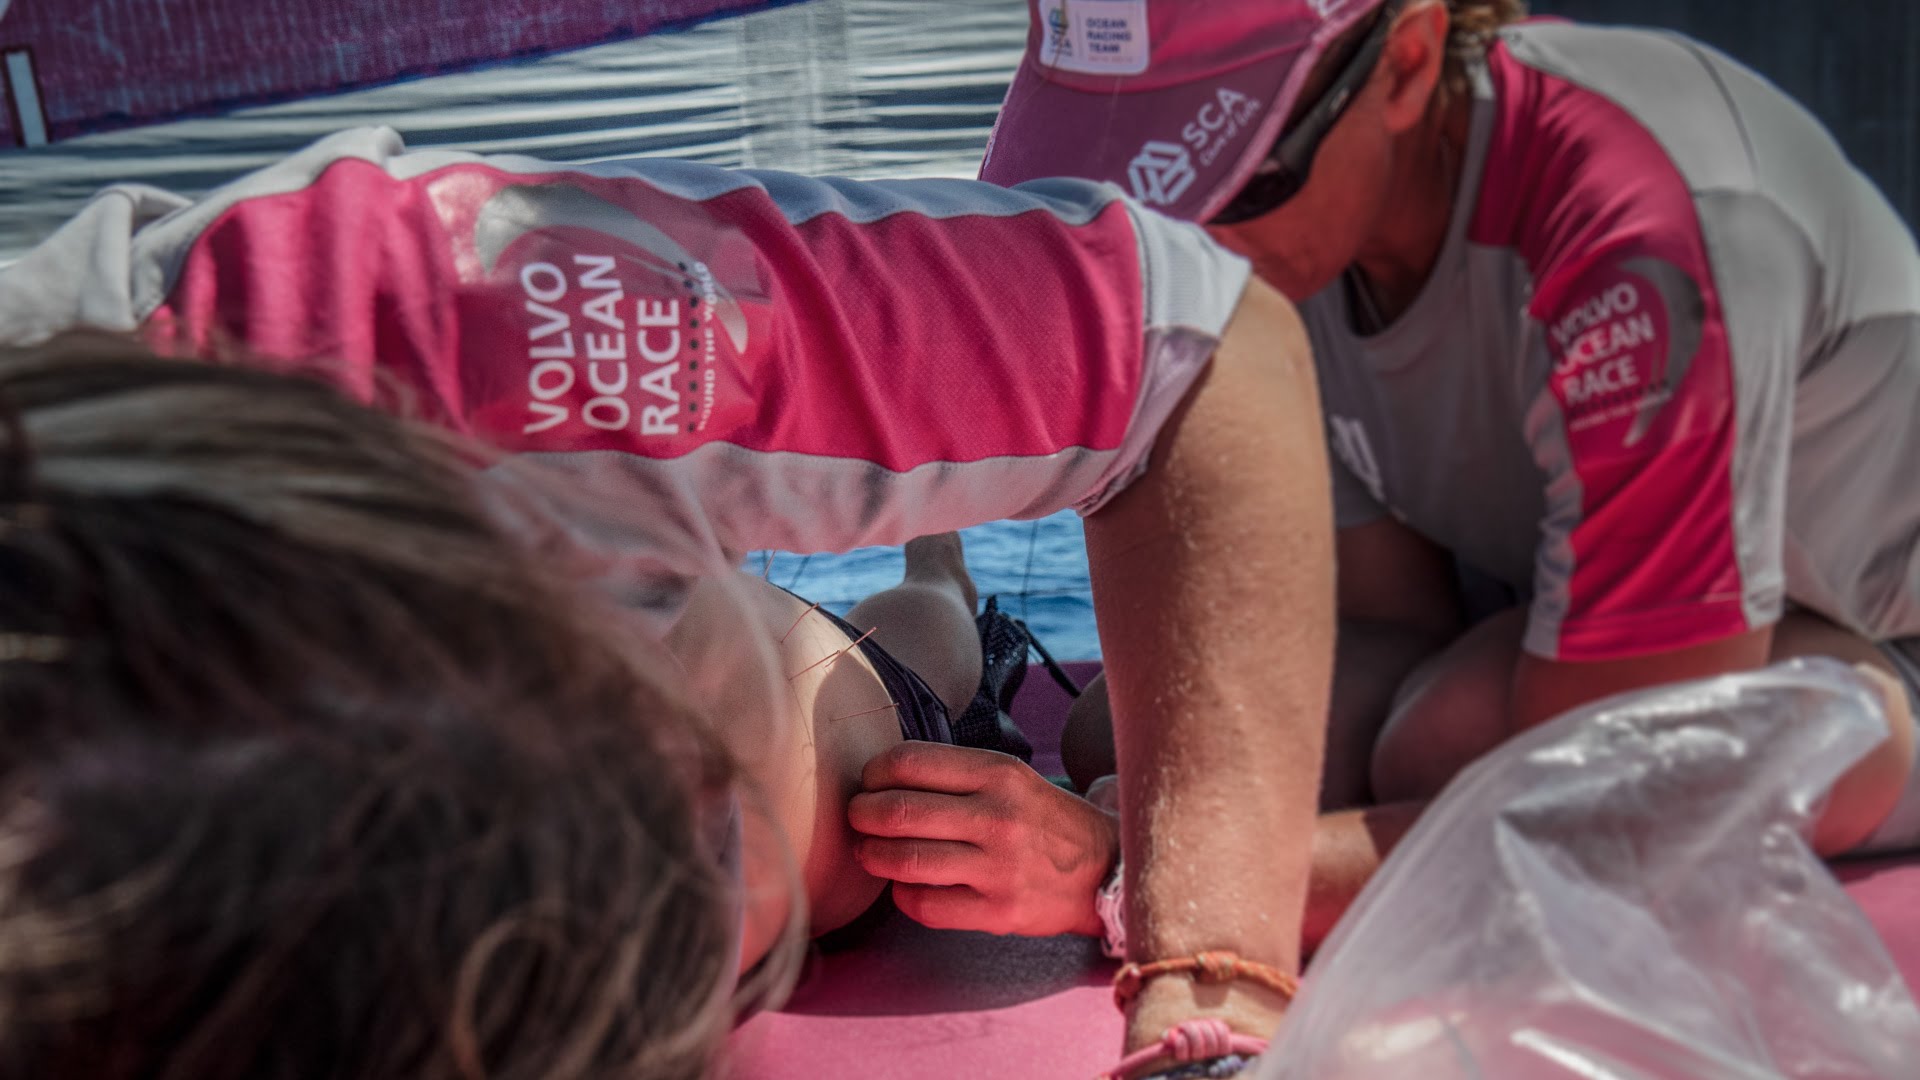 VO-Race – Extreme needling, extreme haircut | Volvo Ocean Race 2014-15